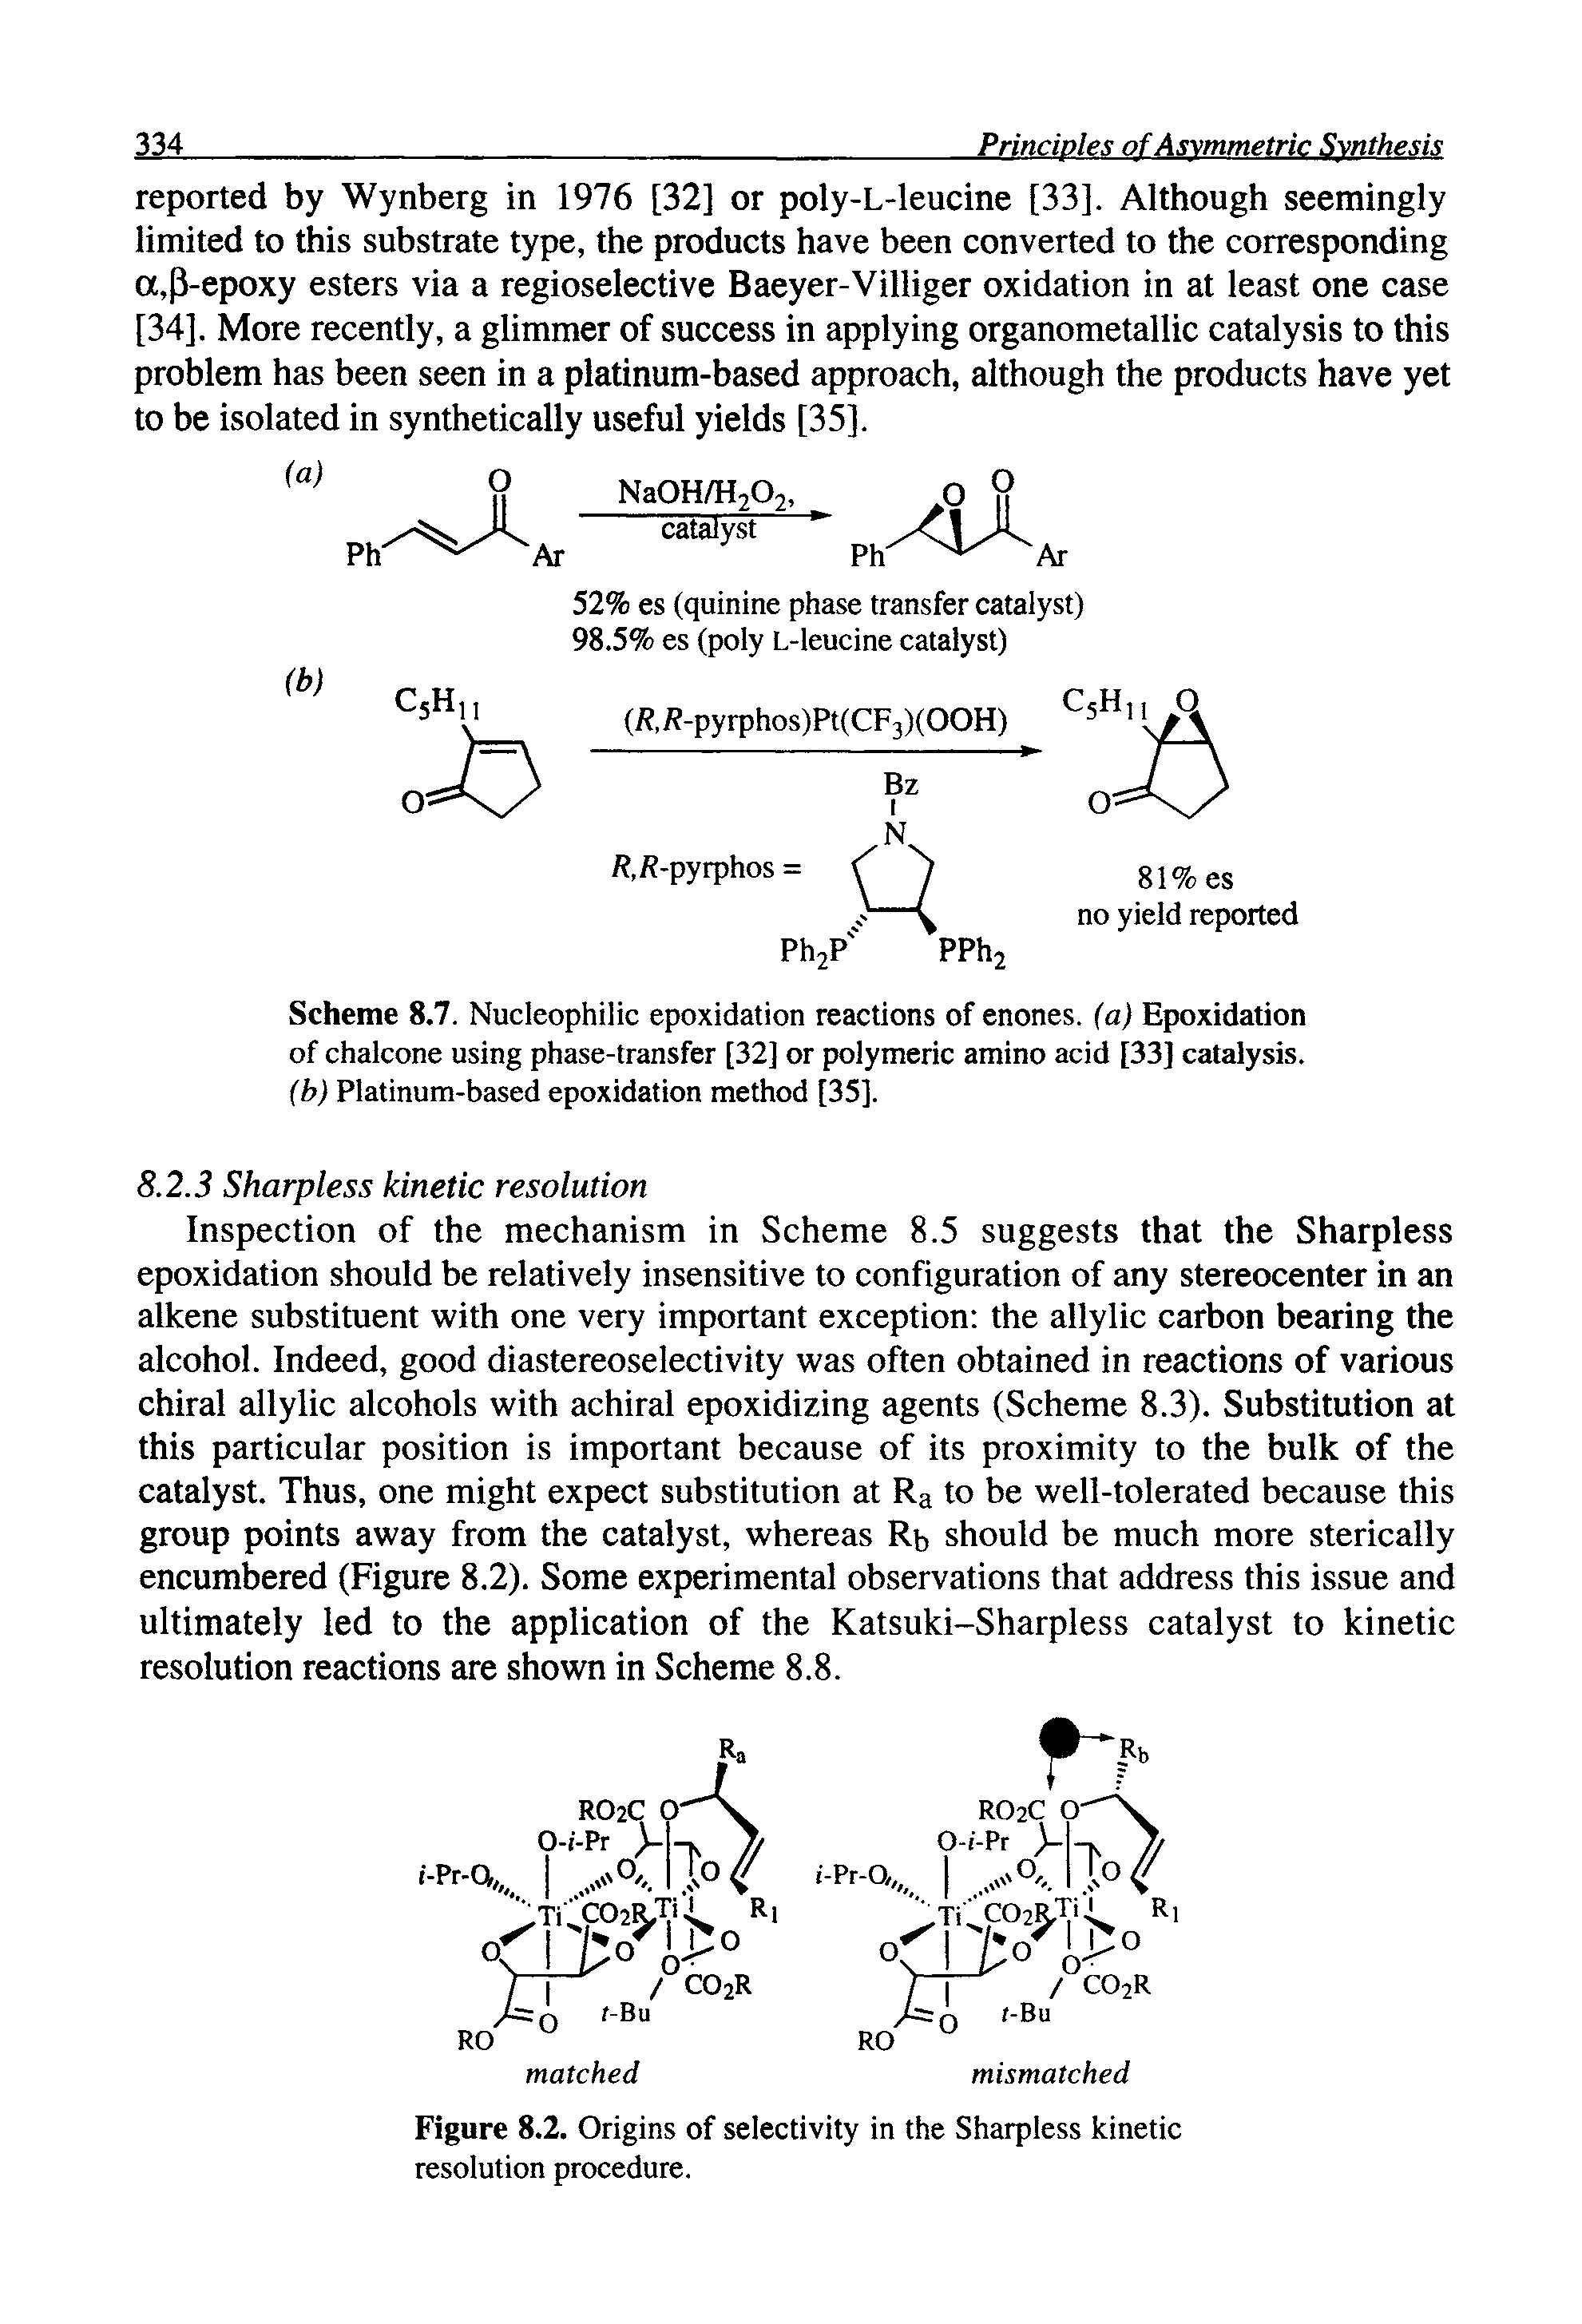 Scheme 8.7. Nucleophilic epoxidation reactions of enones. (a) Epoxidation of chalcone using phase-transfer [32] or polymeric amino acid [33] catalysis.